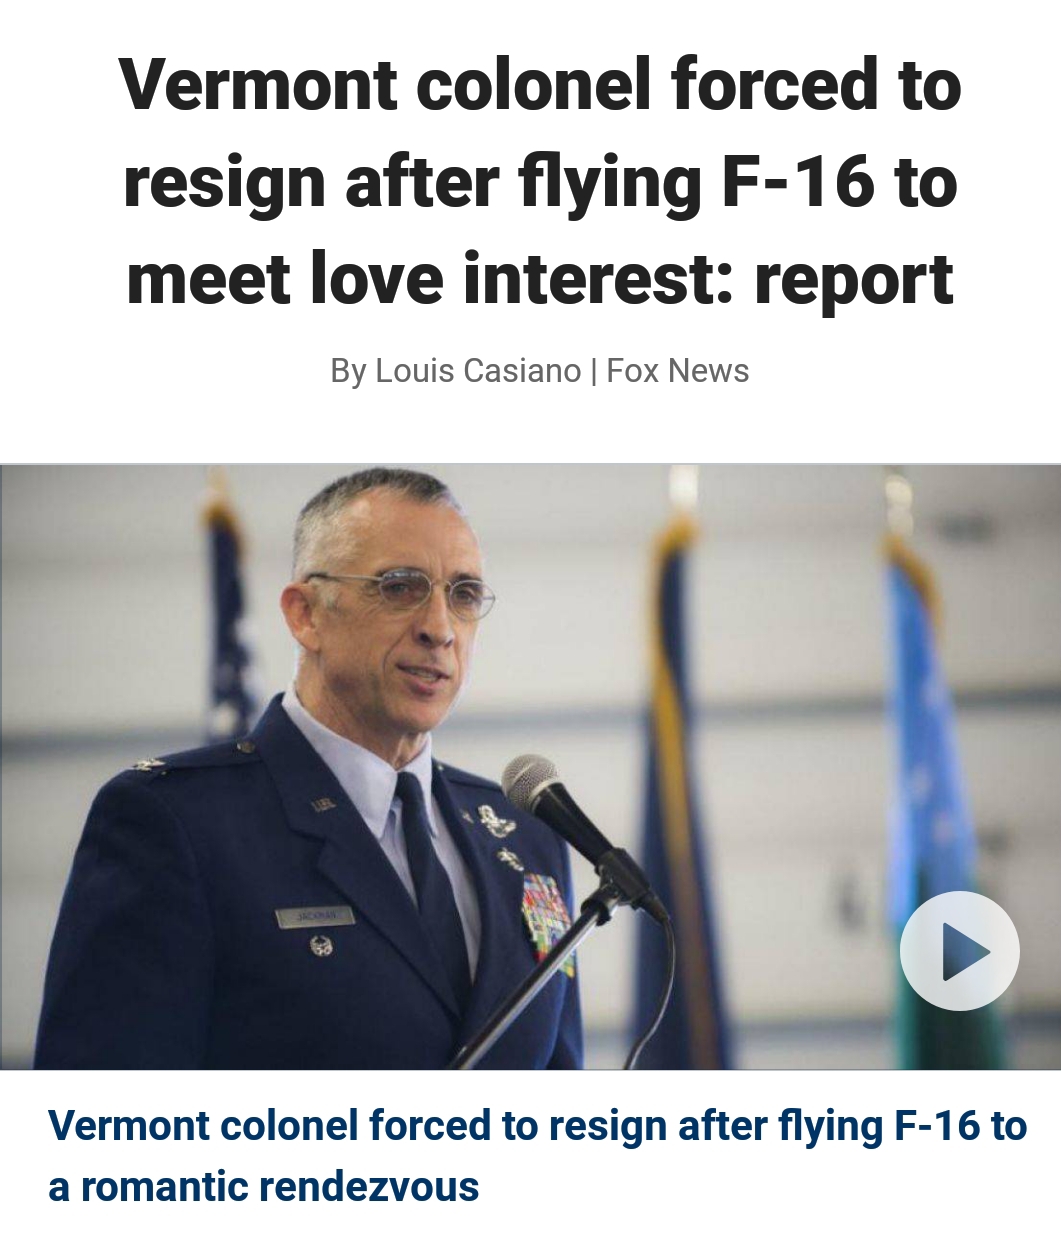 col thomas jackman - Vermont colonel forced to resign after flying F16 to meet love interest report By Louis Casiano | Fox News Vermont colonel forced to resign after flying F16 to a romantic rendezvous